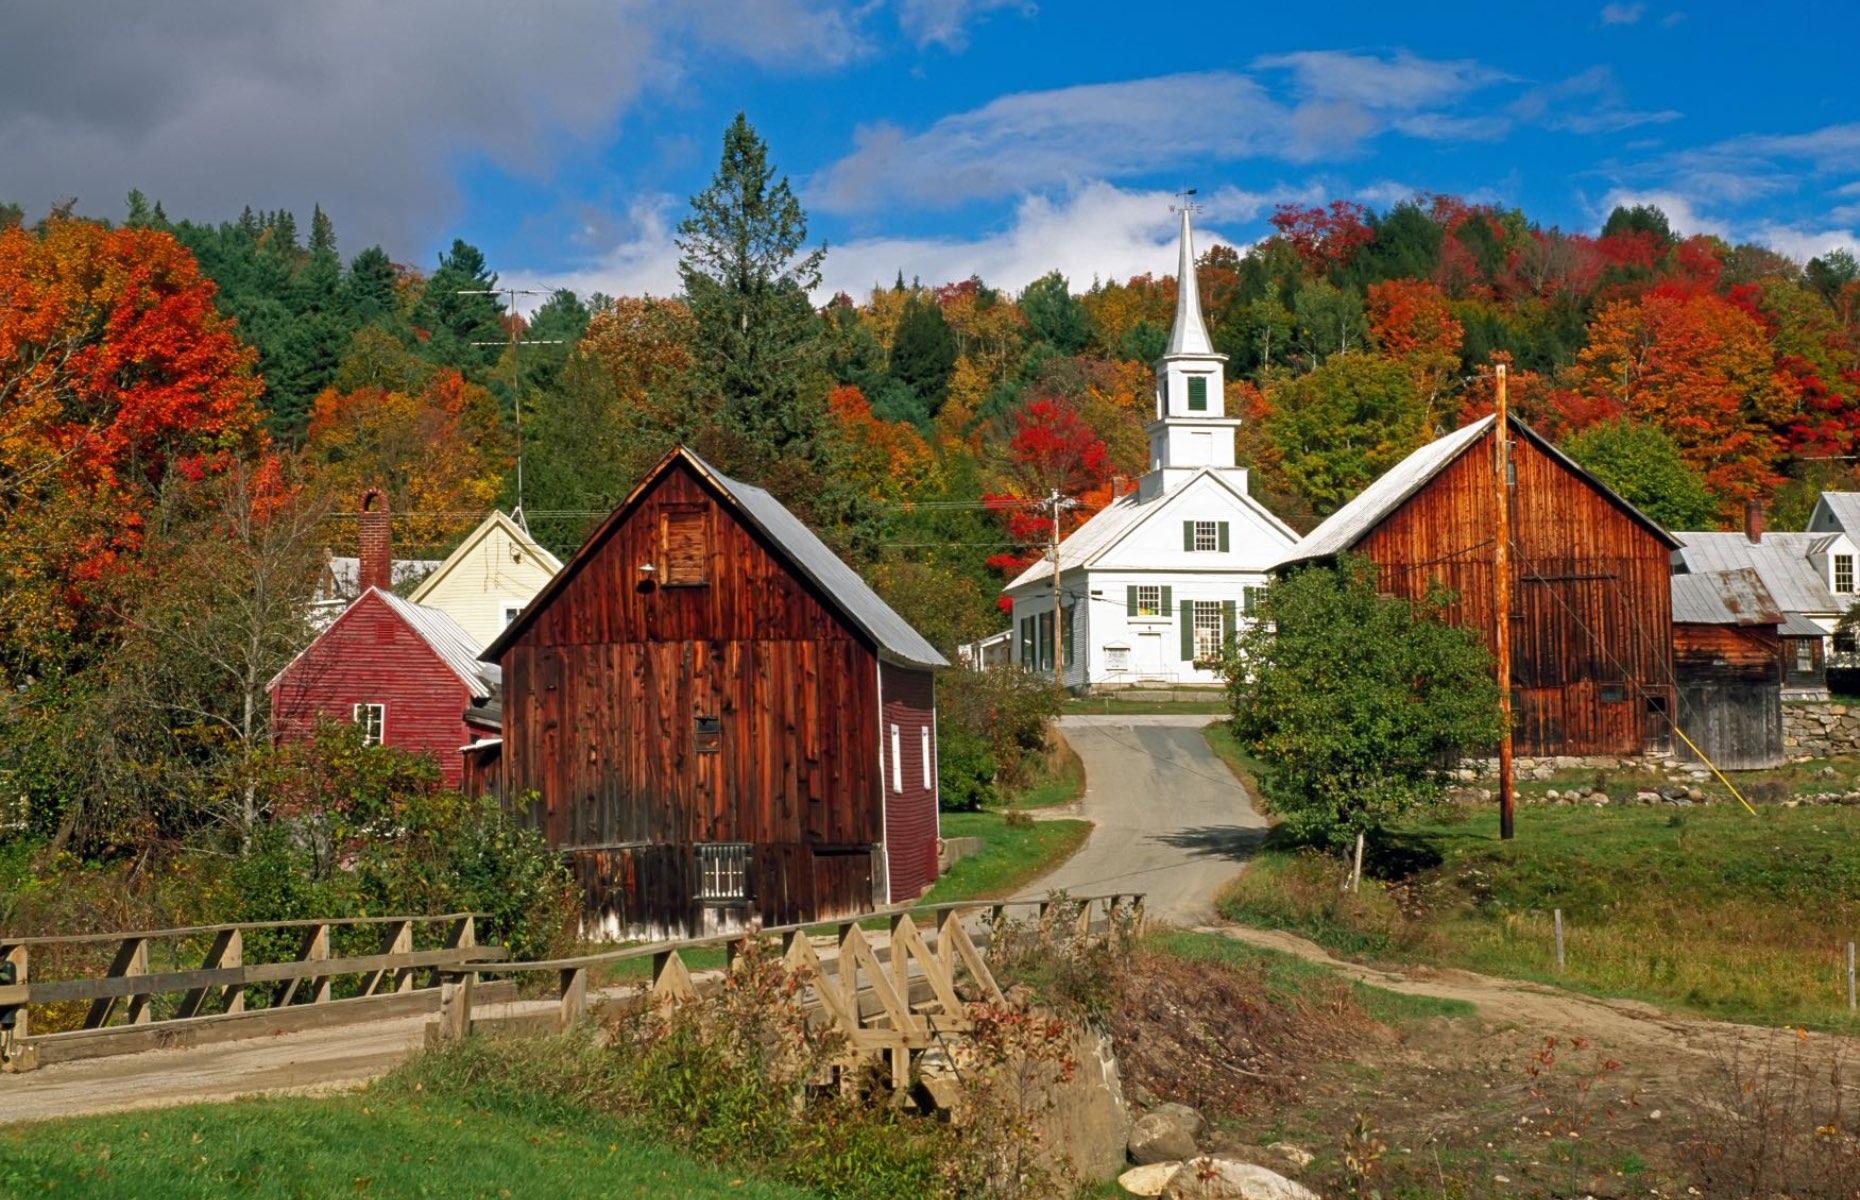 The picture-perfect village of Waits River is so enchanting that it features on postcards and even jigsaw puzzles. And if you're in eastern Vermont, it’s well worth making a detour to snap your own photos, especially in fall when the surrounding canopy explodes in red and gold. Though tiny, the riverside settlement of cute barns and homesteads has a striking white Methodist church and its vintage schoolhouse is listed on the USA's National Register of Historic Places.